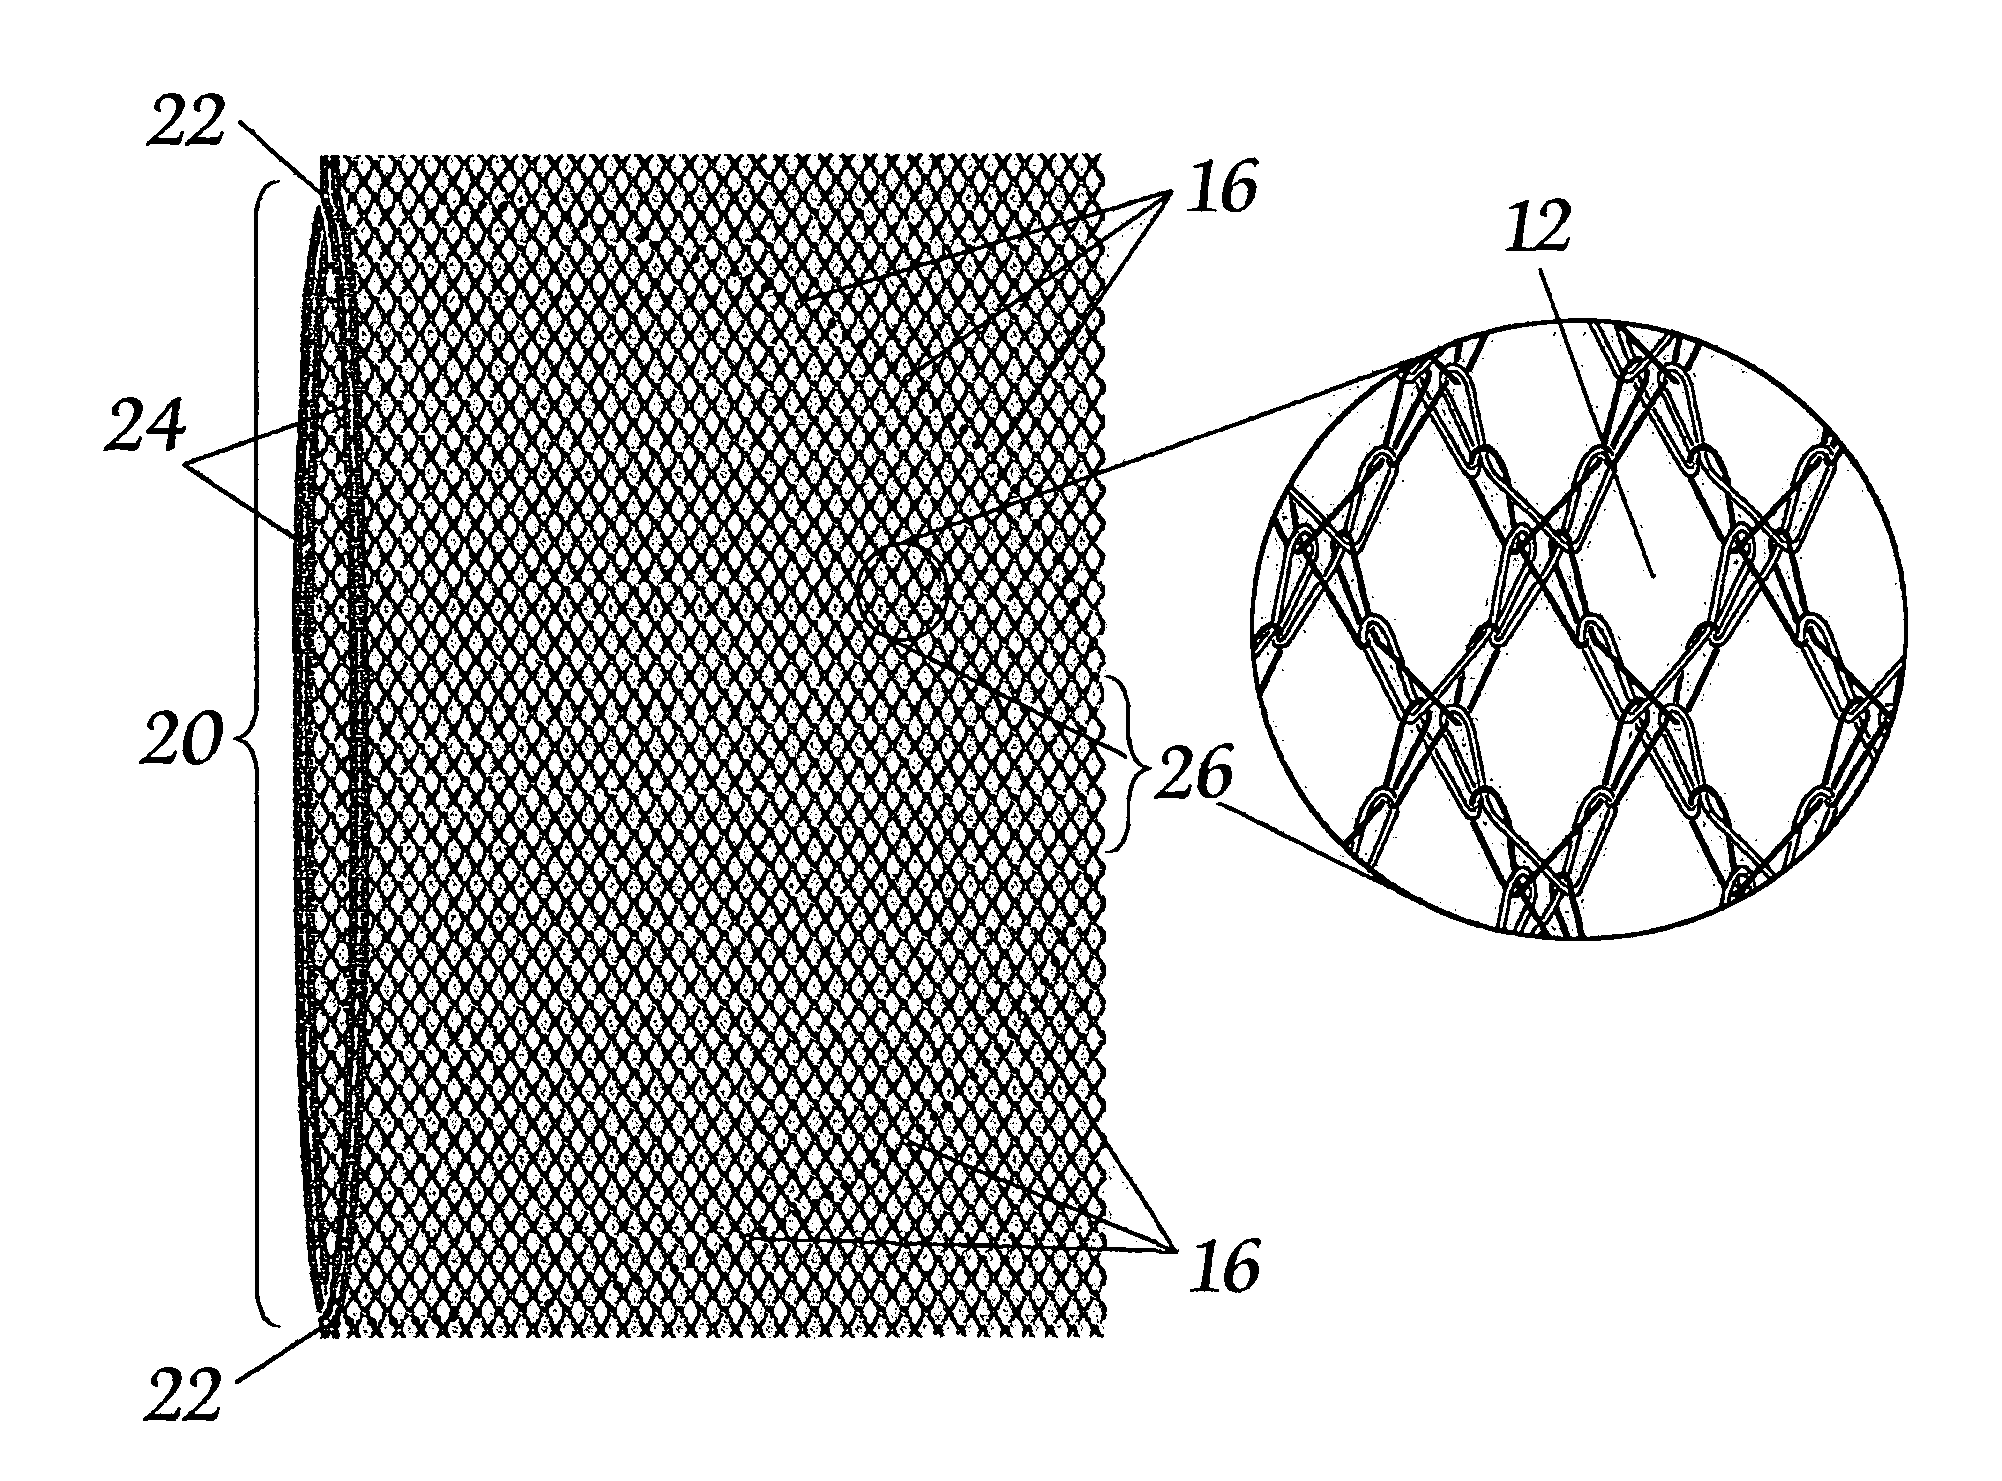 Warp knit fabrics useful for medical articles and methods of making same